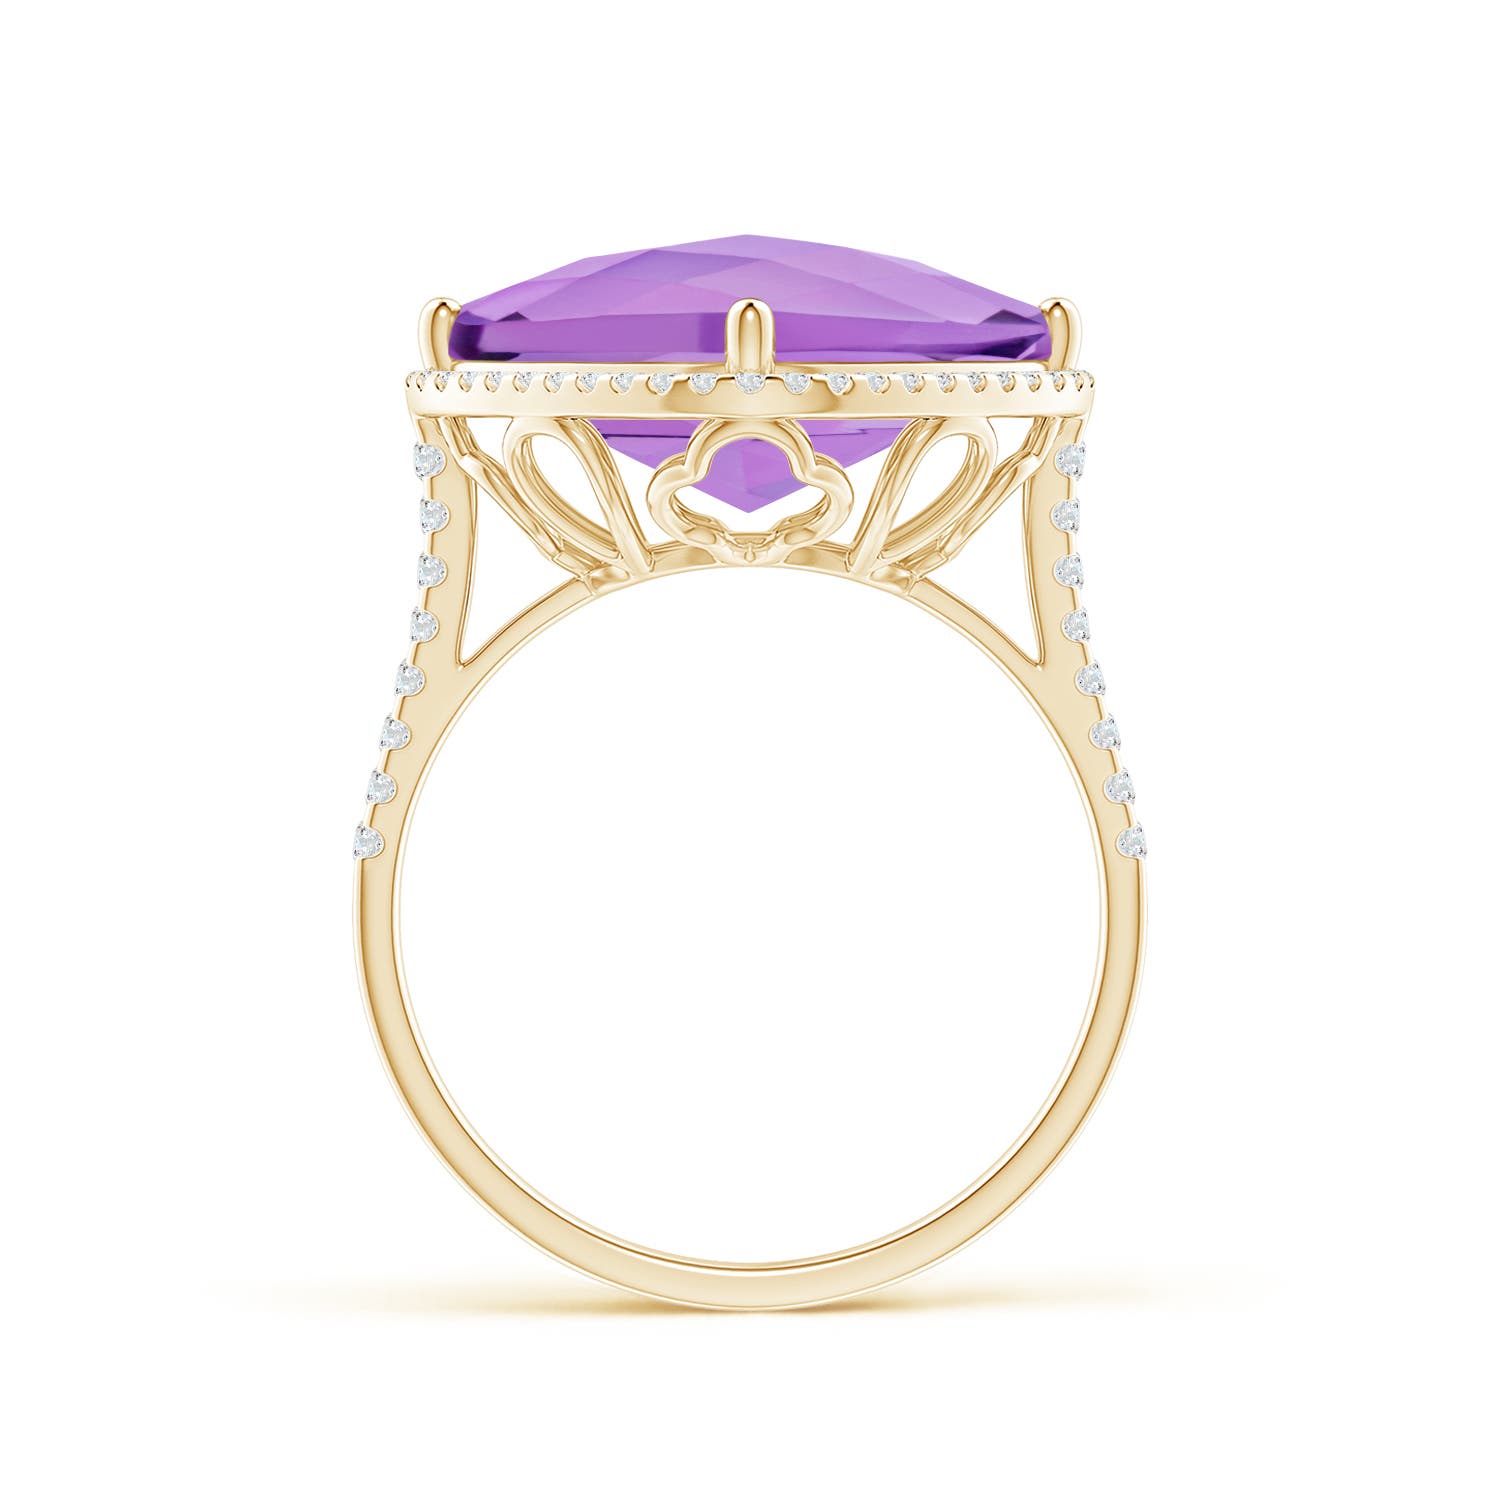 A - Amethyst / 8.32 CT / 14 KT Yellow Gold